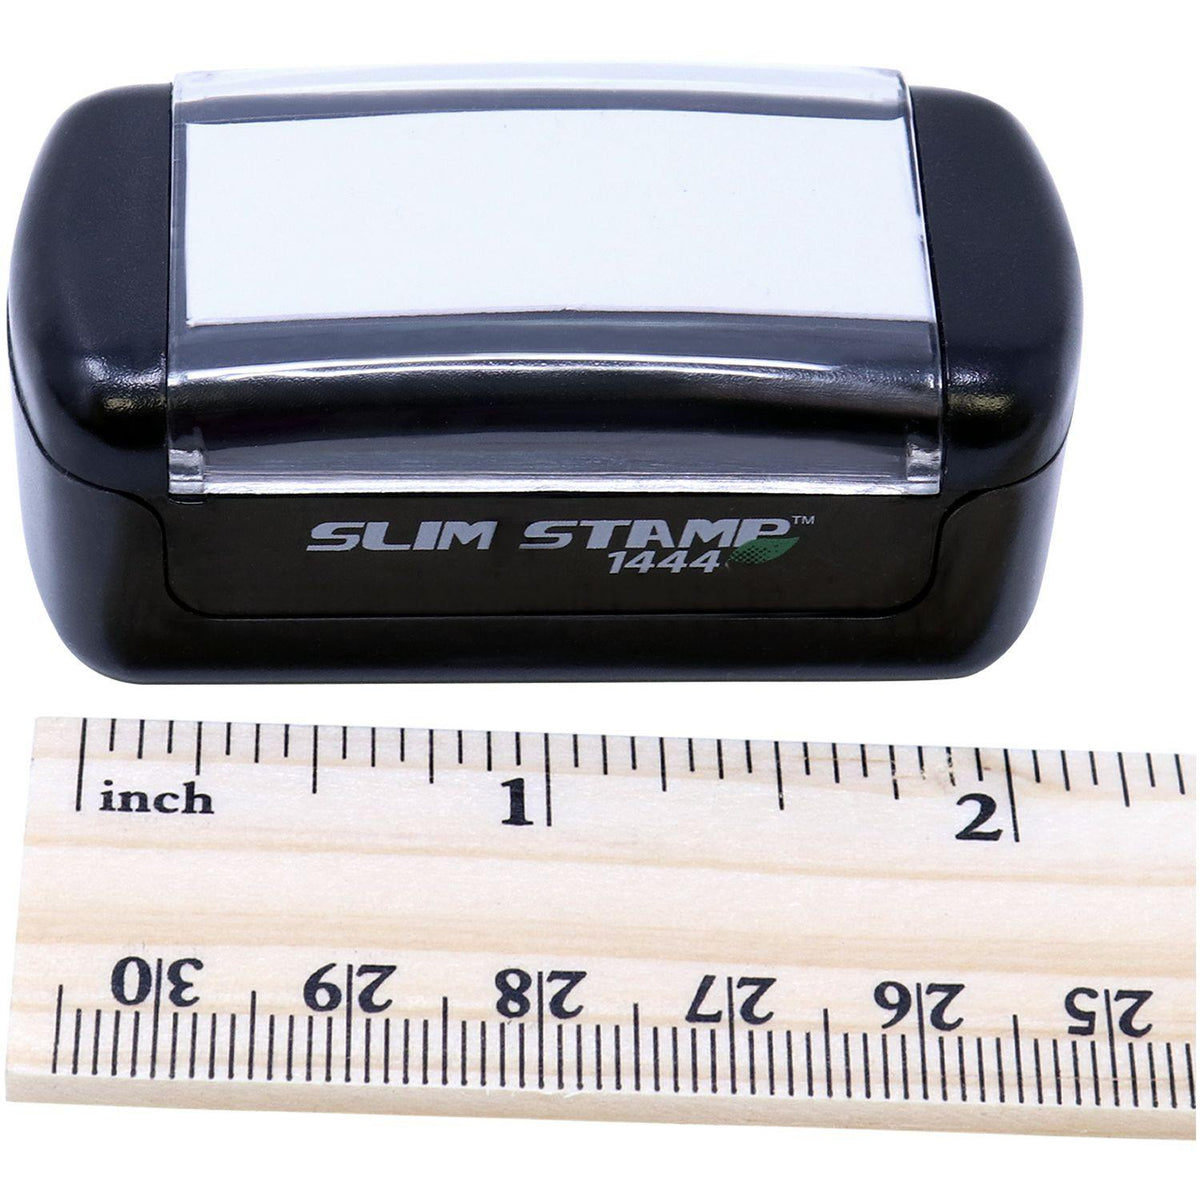 Measurement Slim Pre-Inked For Deposit Only with Line Stamp with Ruler